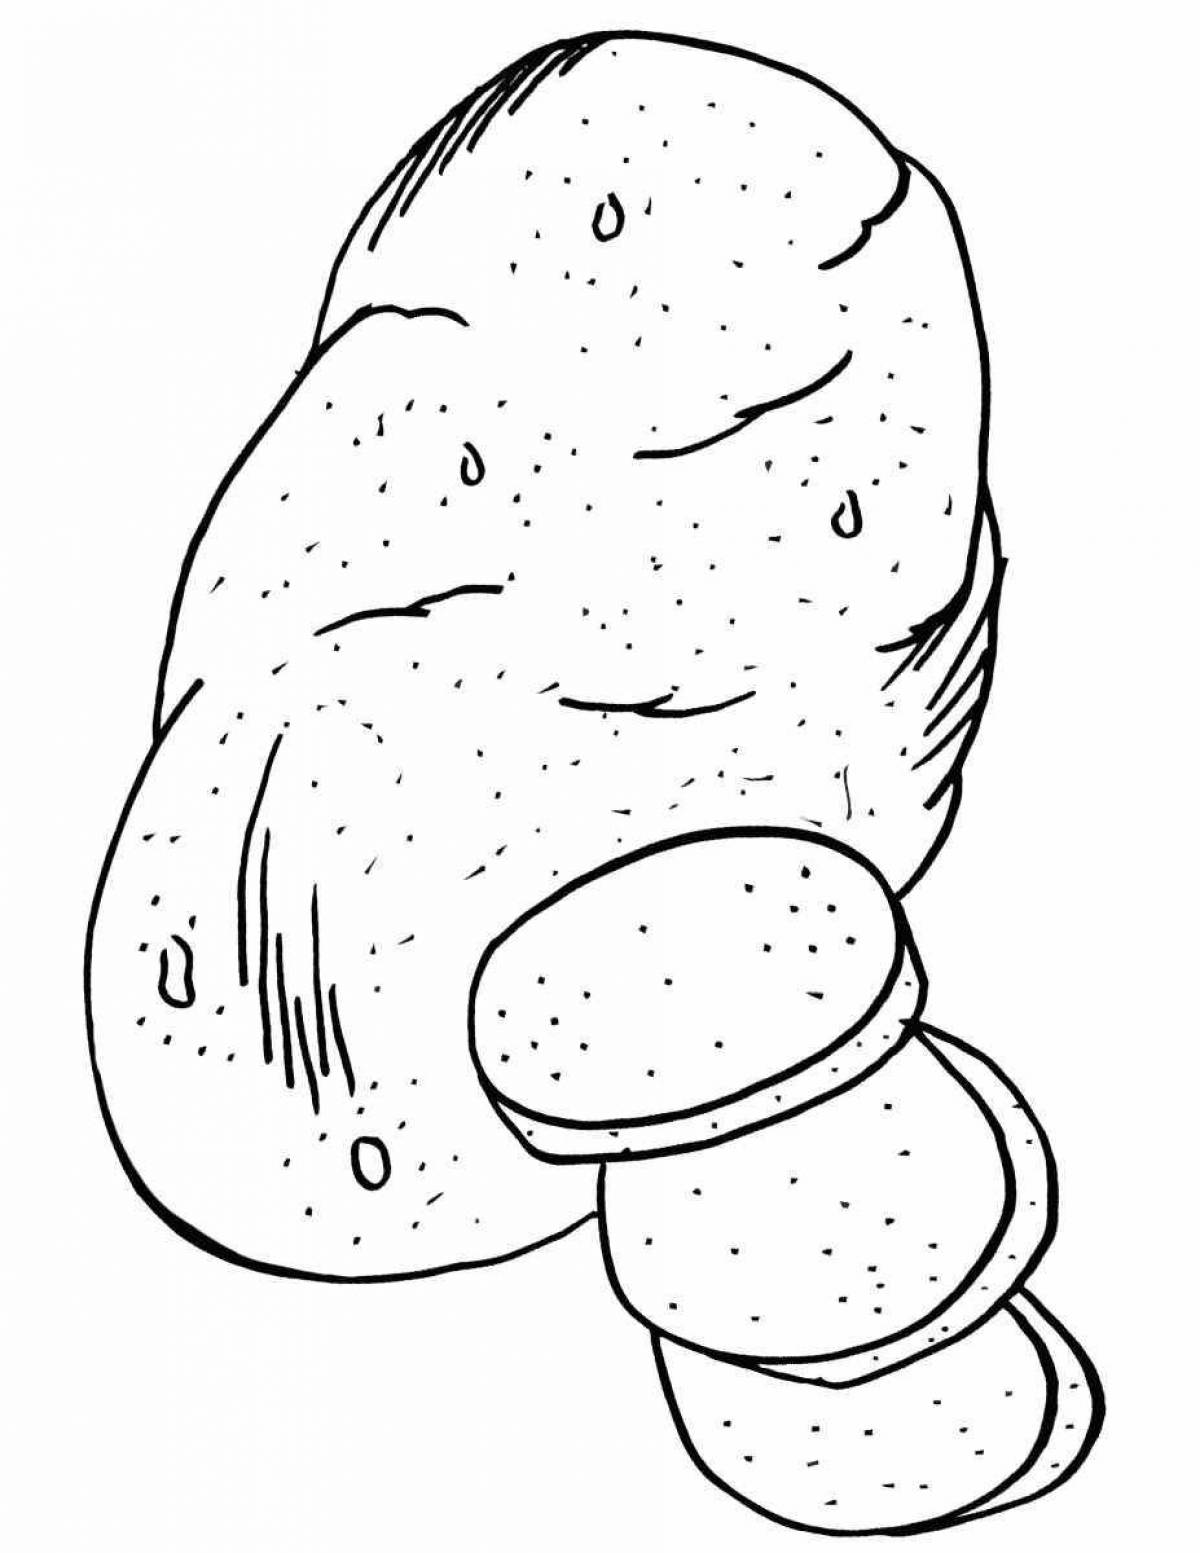 Amazing potato coloring pages for kids